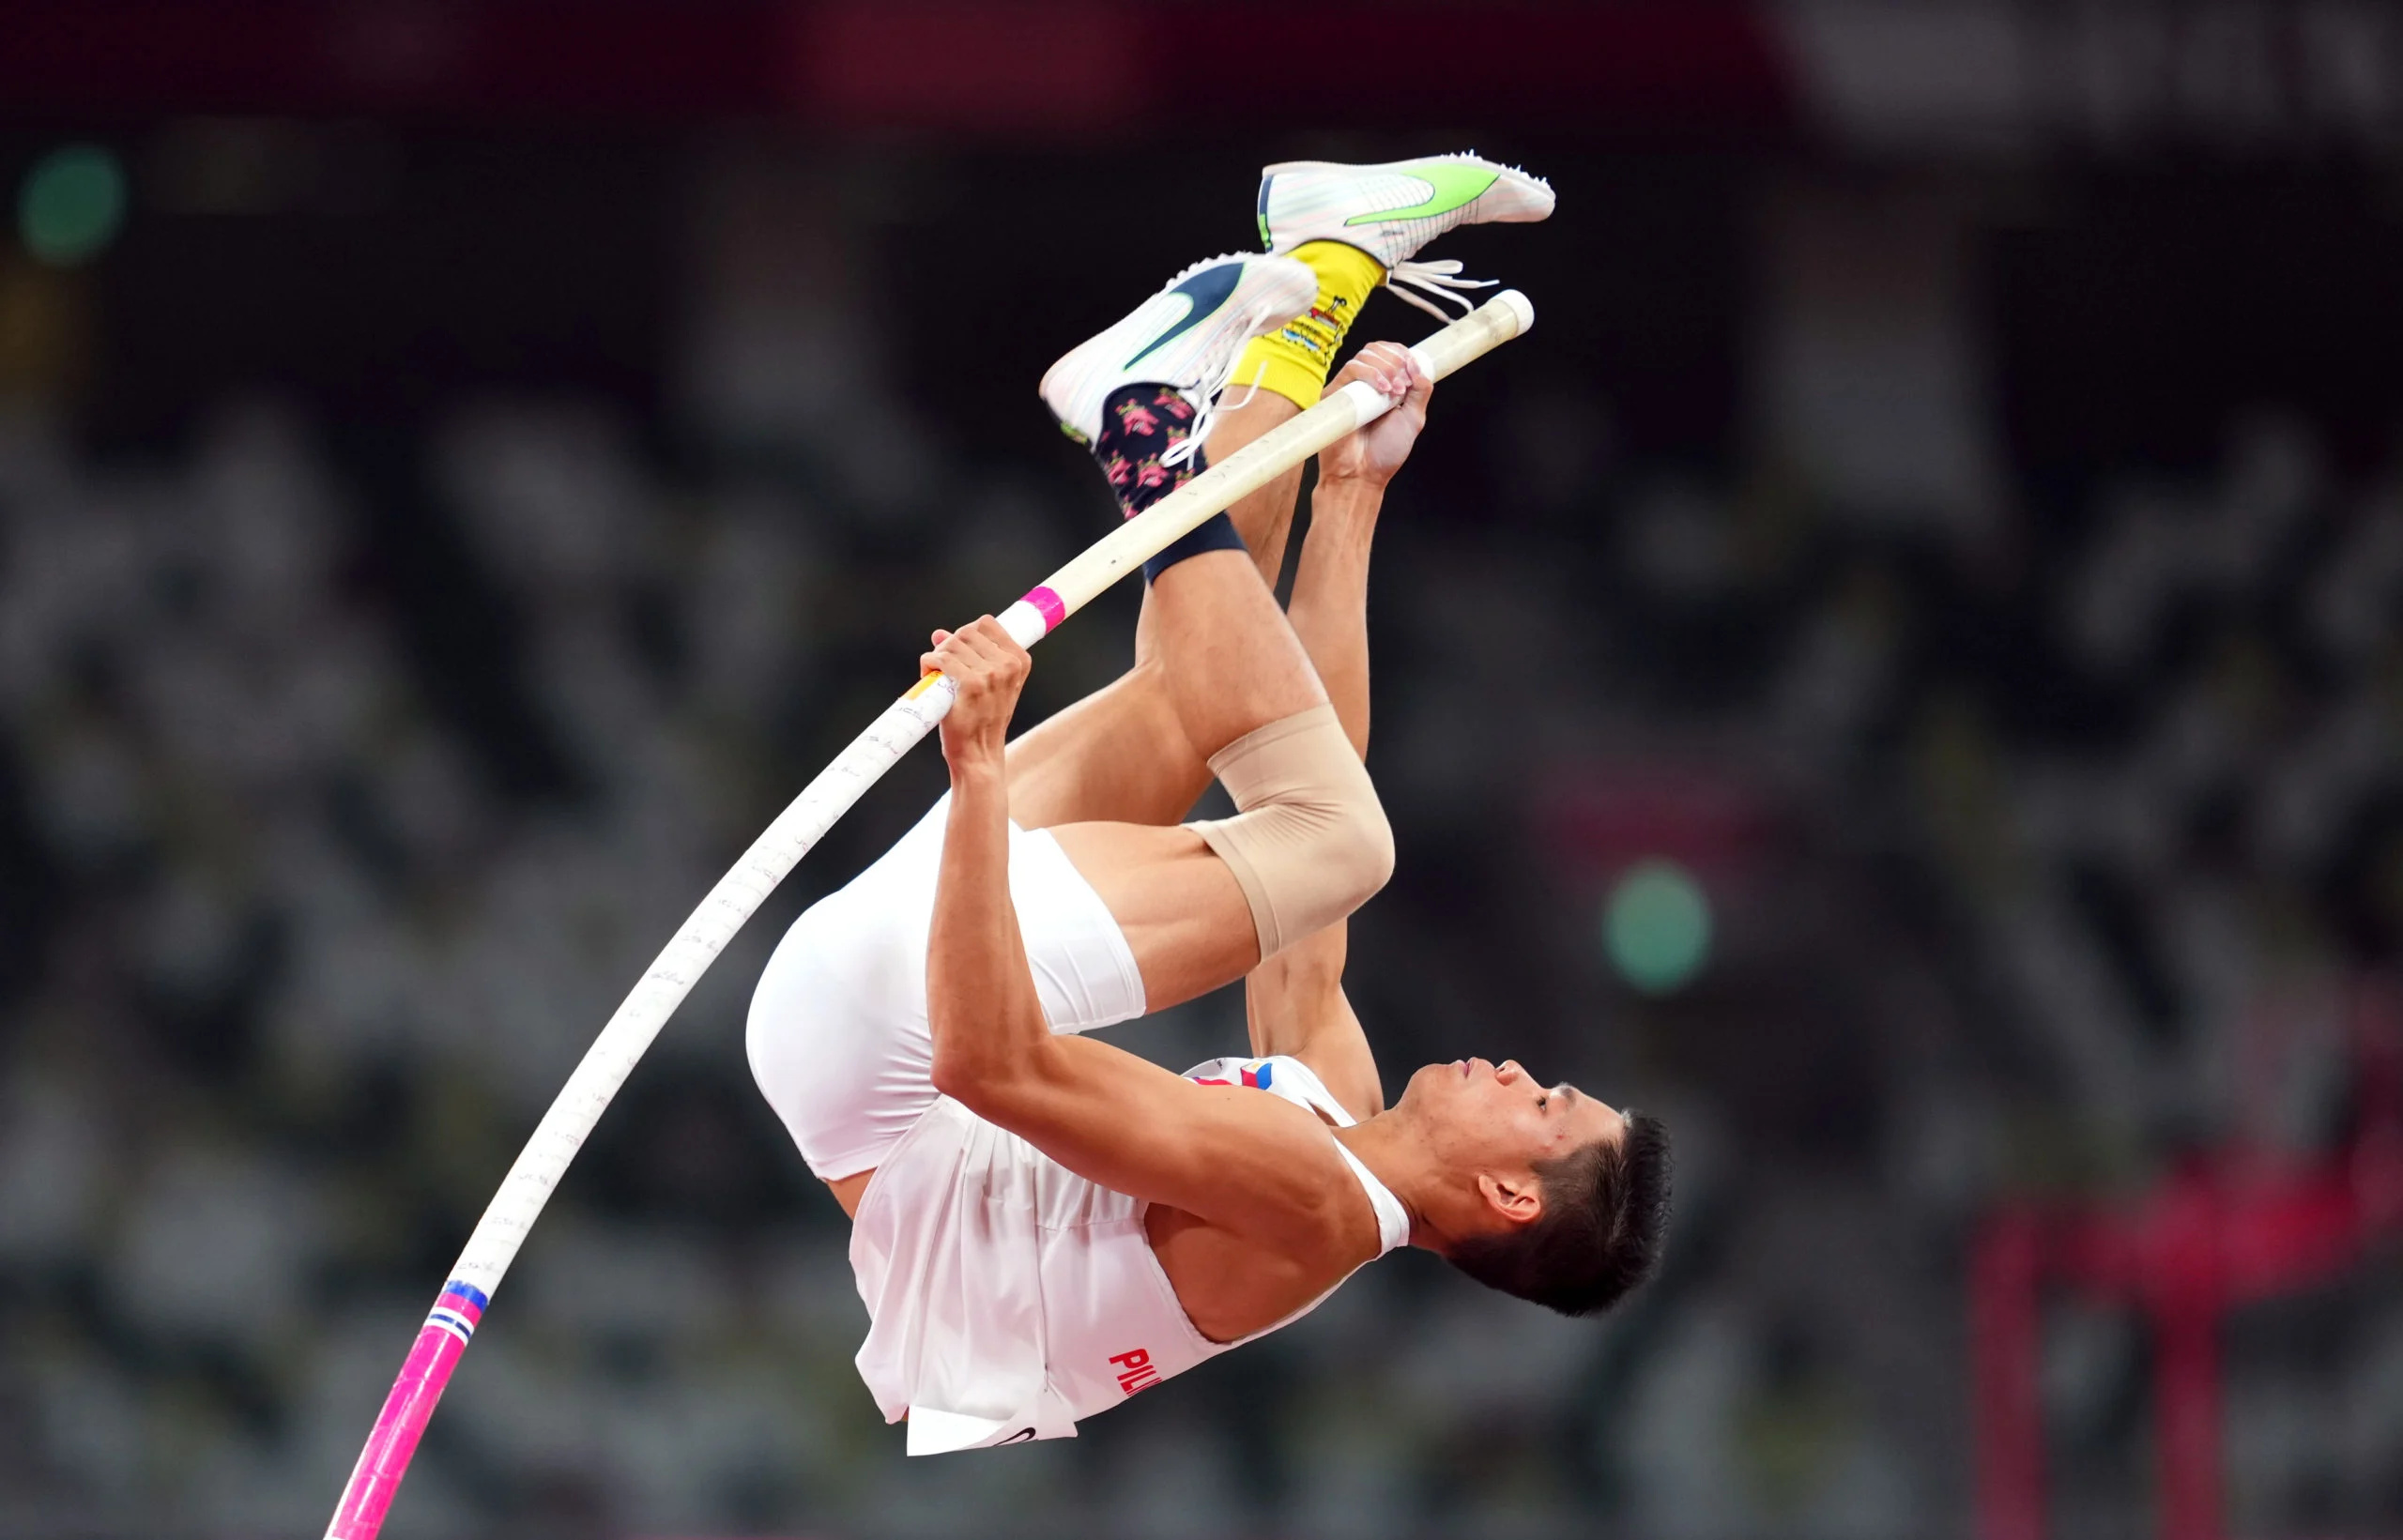 Pole Vaulting: EJ Obiena, Top performers, A sport of leaping over a bar by using flexible stick. 2560x1650 HD Wallpaper.